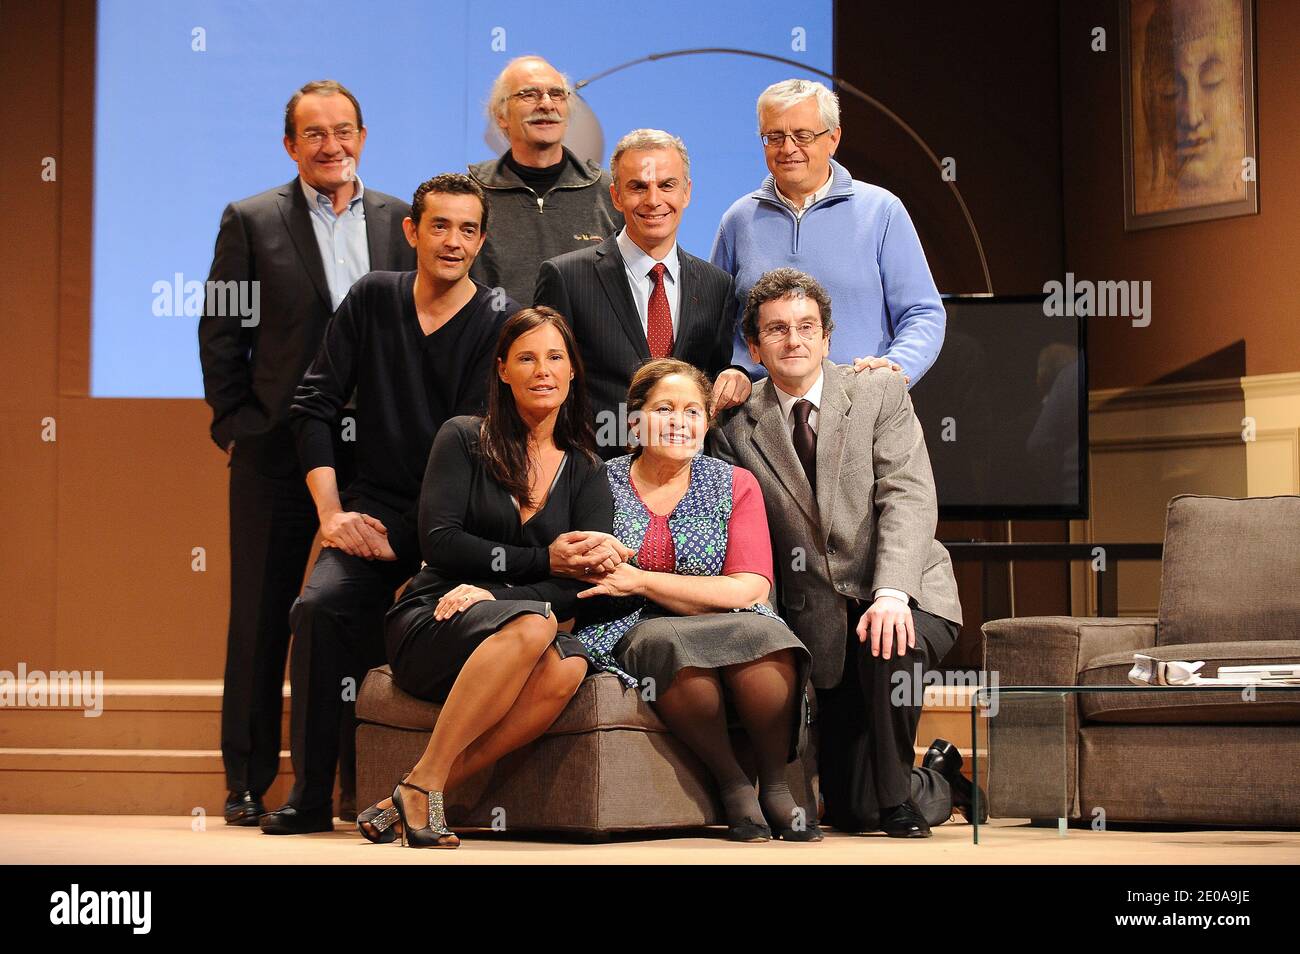 Jean-Pierre Pernaut, Stephane Slima, Jean-Claude Islert, Philippe Bardy,  Erich le Roch, Nathalie Marquay-Pernaut and Gladys Cohen pose after 'Piege  a Matignon' presentation at Theatre du Gymnase in Paris, France on February  16,